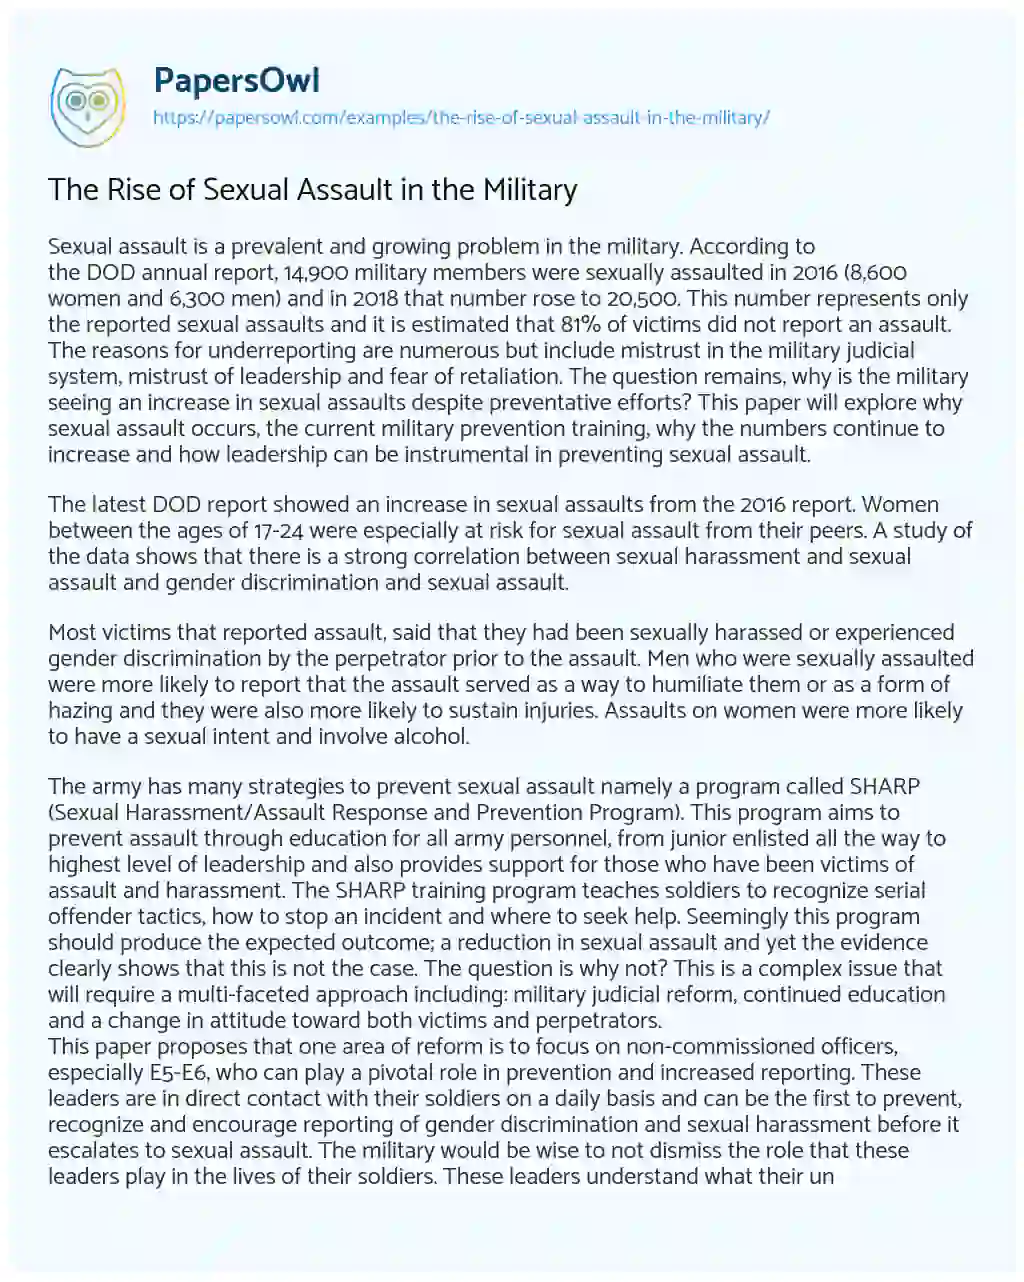 The Rise of Sexual Assault in the Military essay